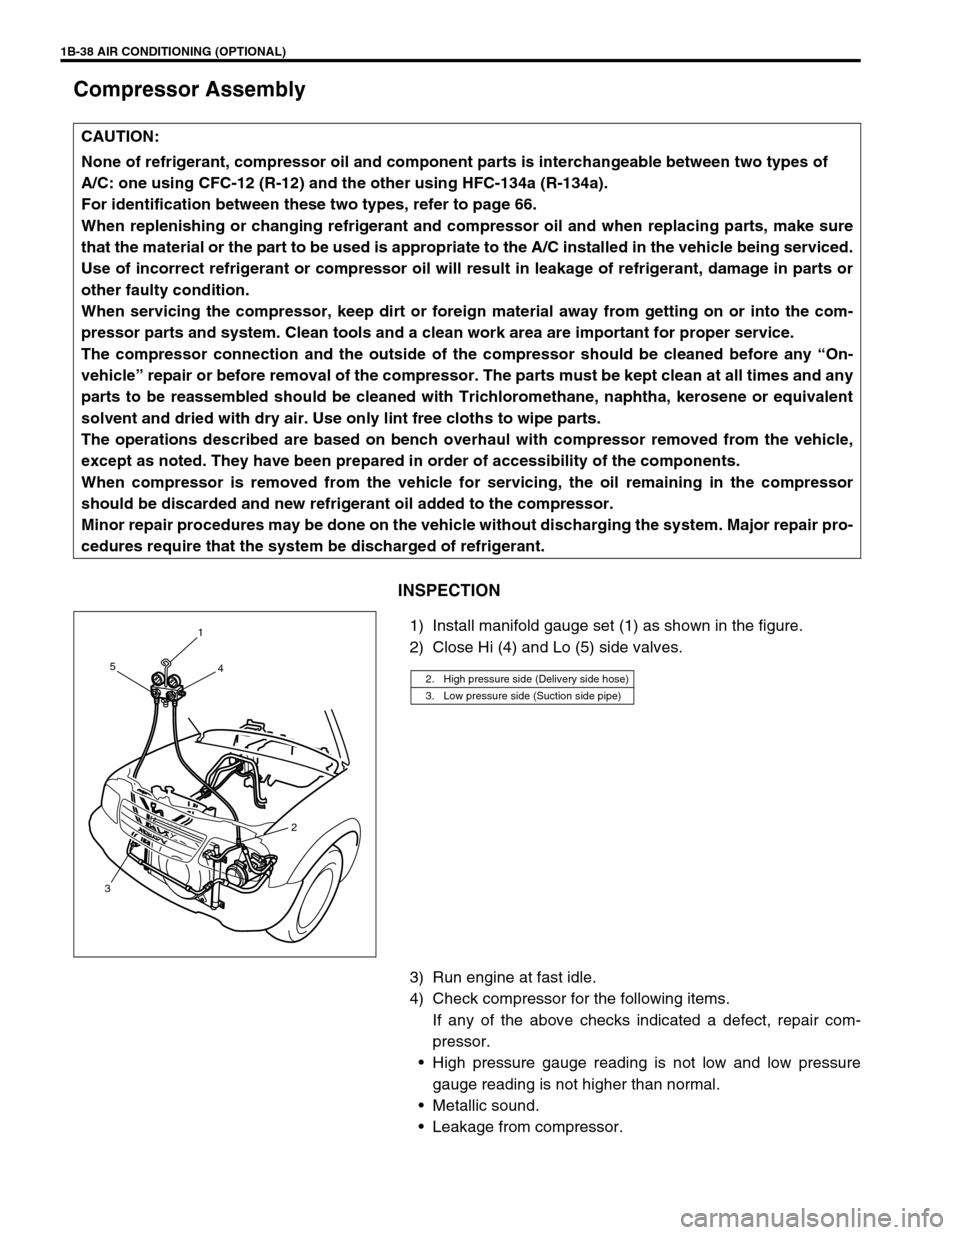 SUZUKI GRAND VITARA 2001 2.G Owners Manual 1B-38 AIR CONDITIONING (OPTIONAL)
Compressor Assembly
INSPECTION
1) Install manifold gauge set (1) as shown in the figure.
2) Close Hi (4) and Lo (5) side valves.
3) Run engine at fast idle.
4) Check 